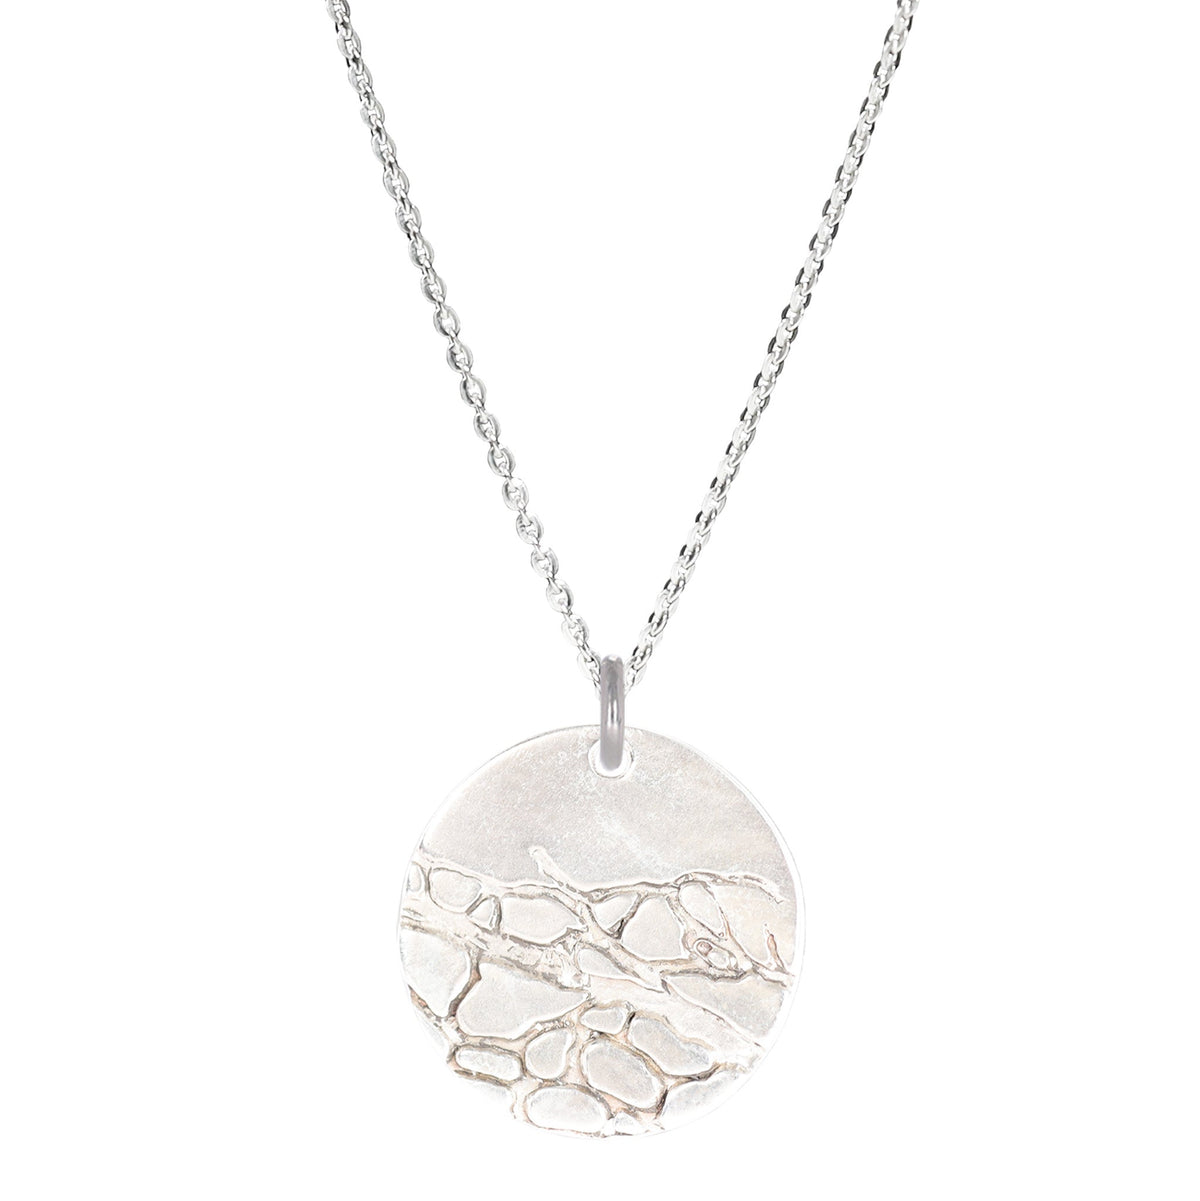 Cactus Skeleton Textured Large Sterling Silver Necklace on a Sterling Silver Cable Chain